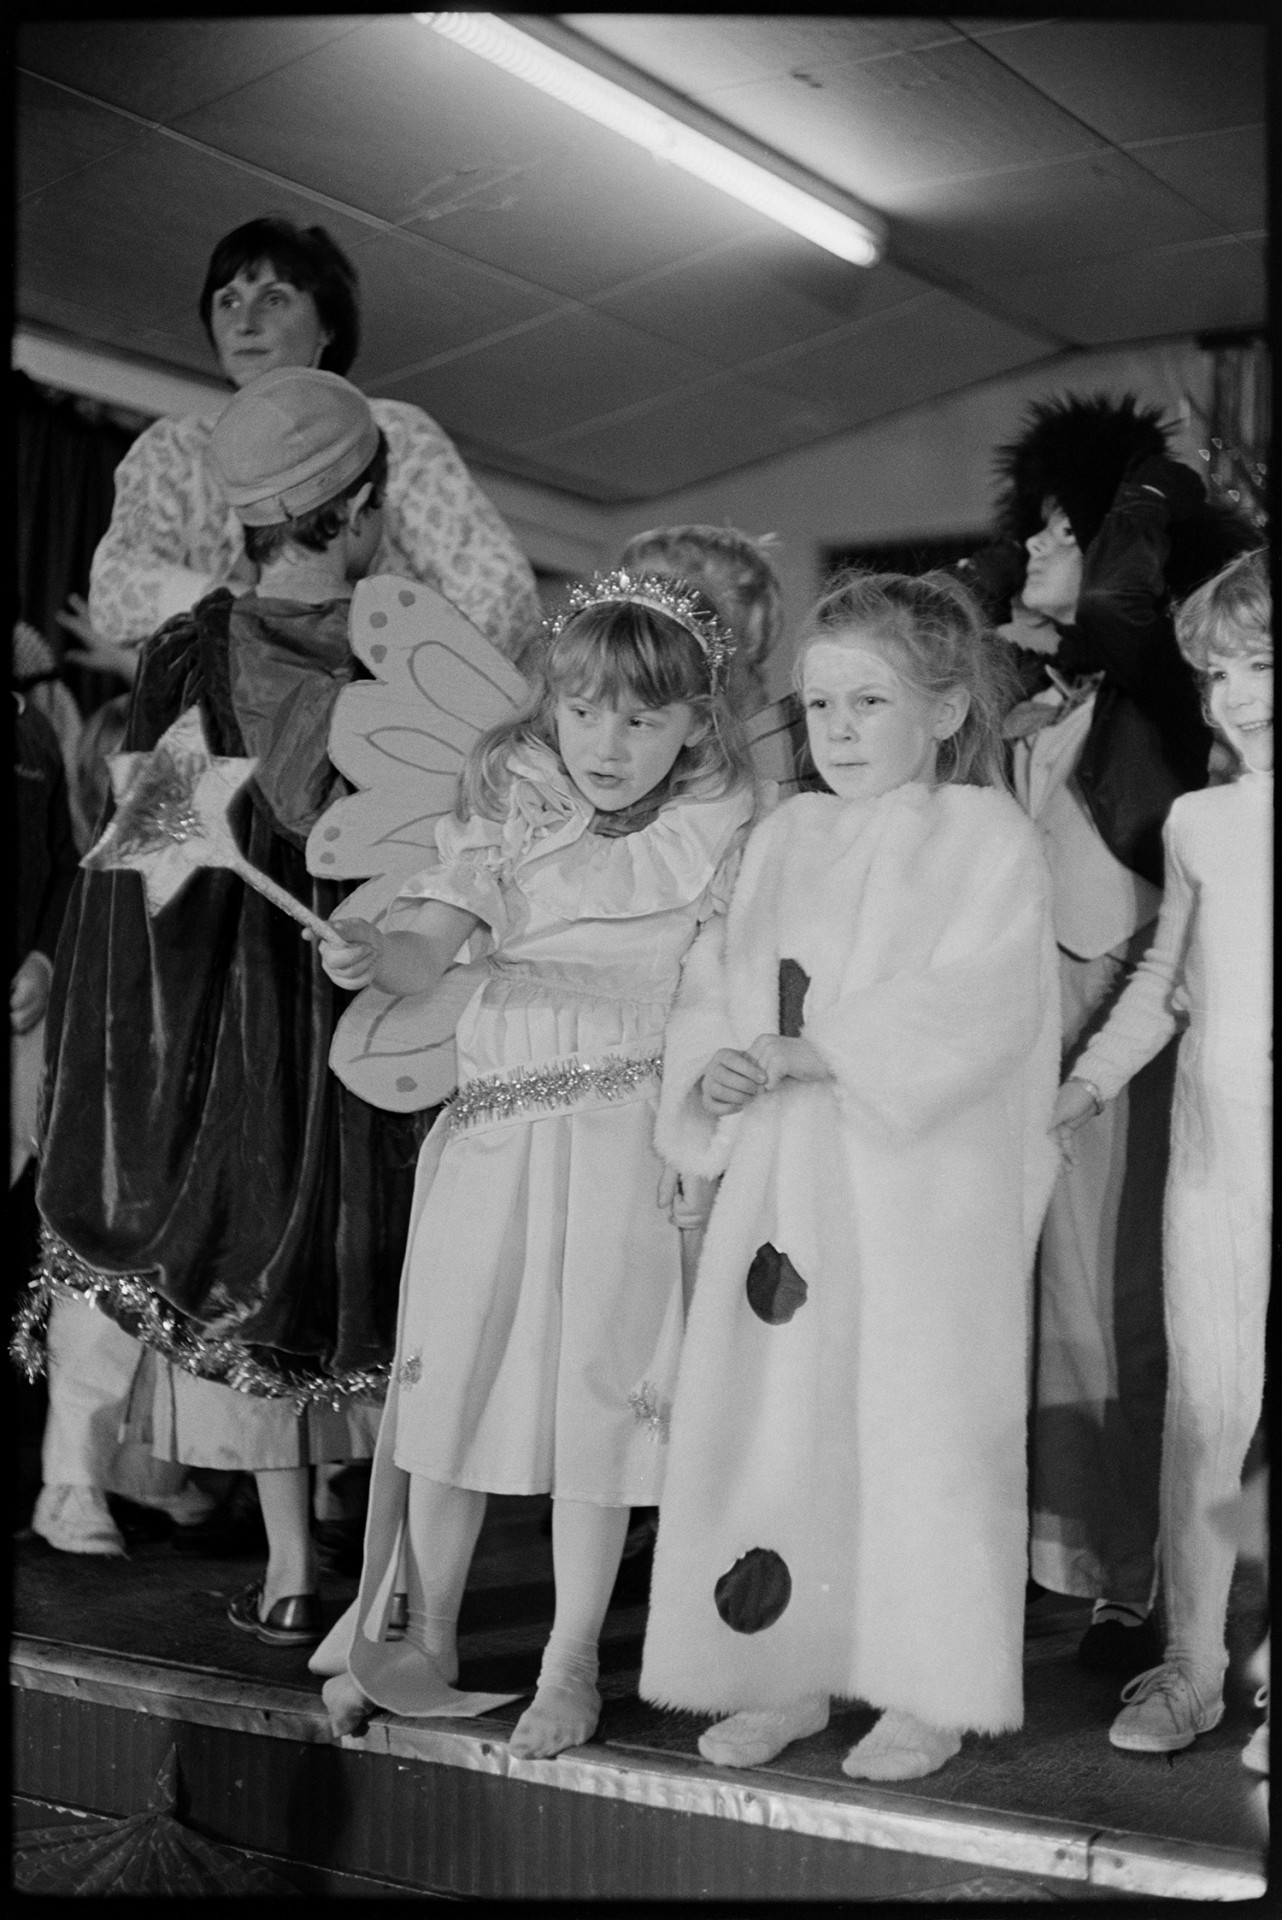 Christmas show in village hall Nativity play, children performing.
[Children performing in a Christmas show on the stage of Dolton Village Hall. One child is dressed as a fairy.]